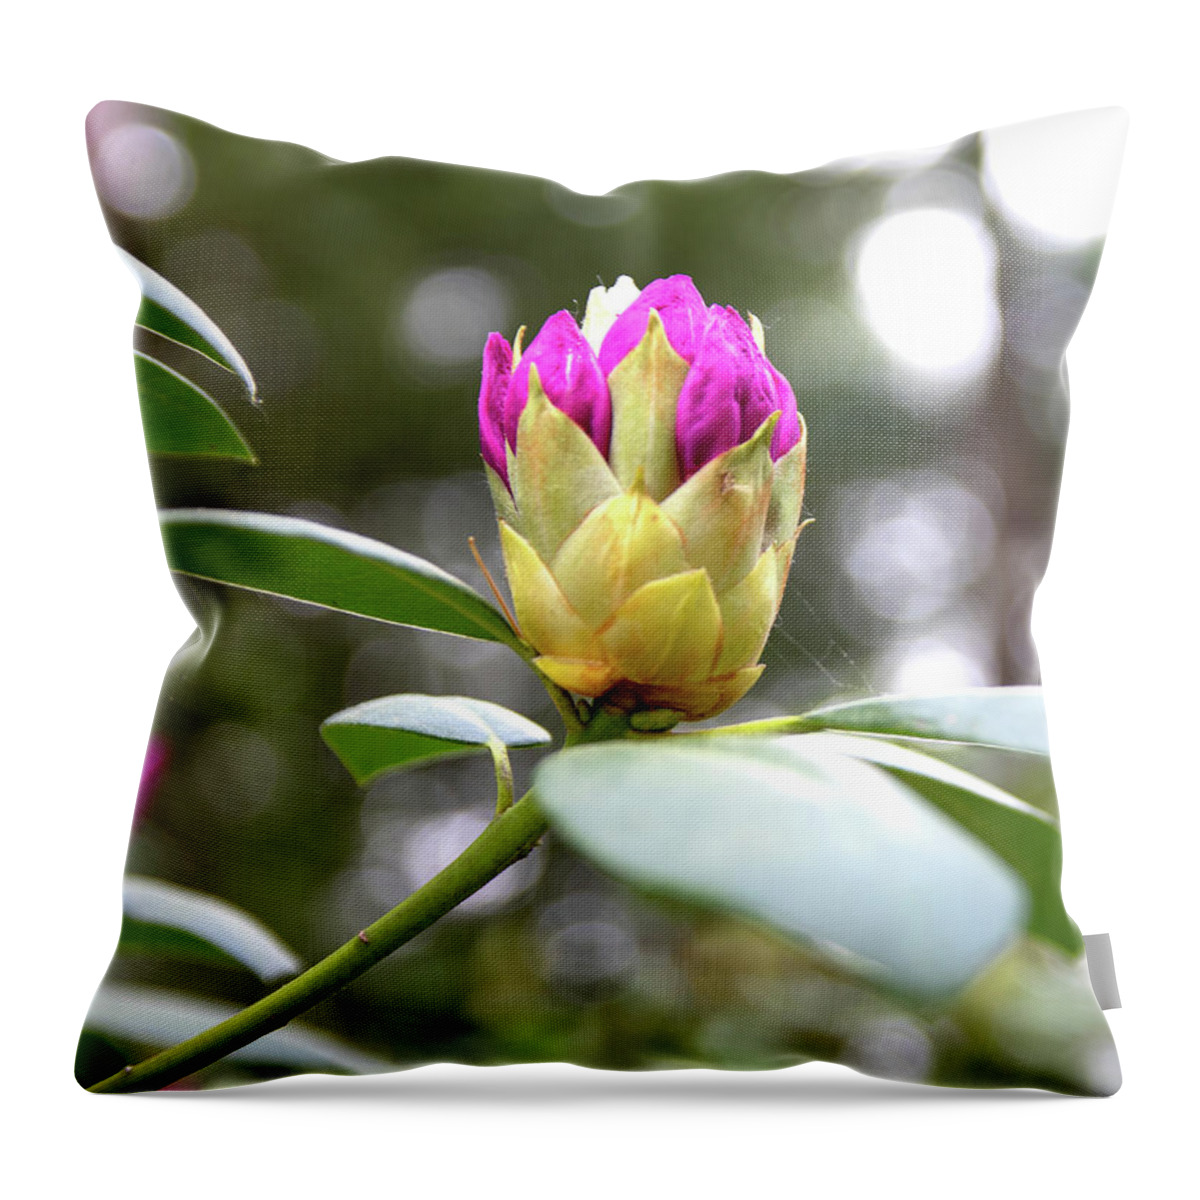 Rhododendron Throw Pillow featuring the photograph Cornell Botanic Gardens #5 by Mindy Musick King